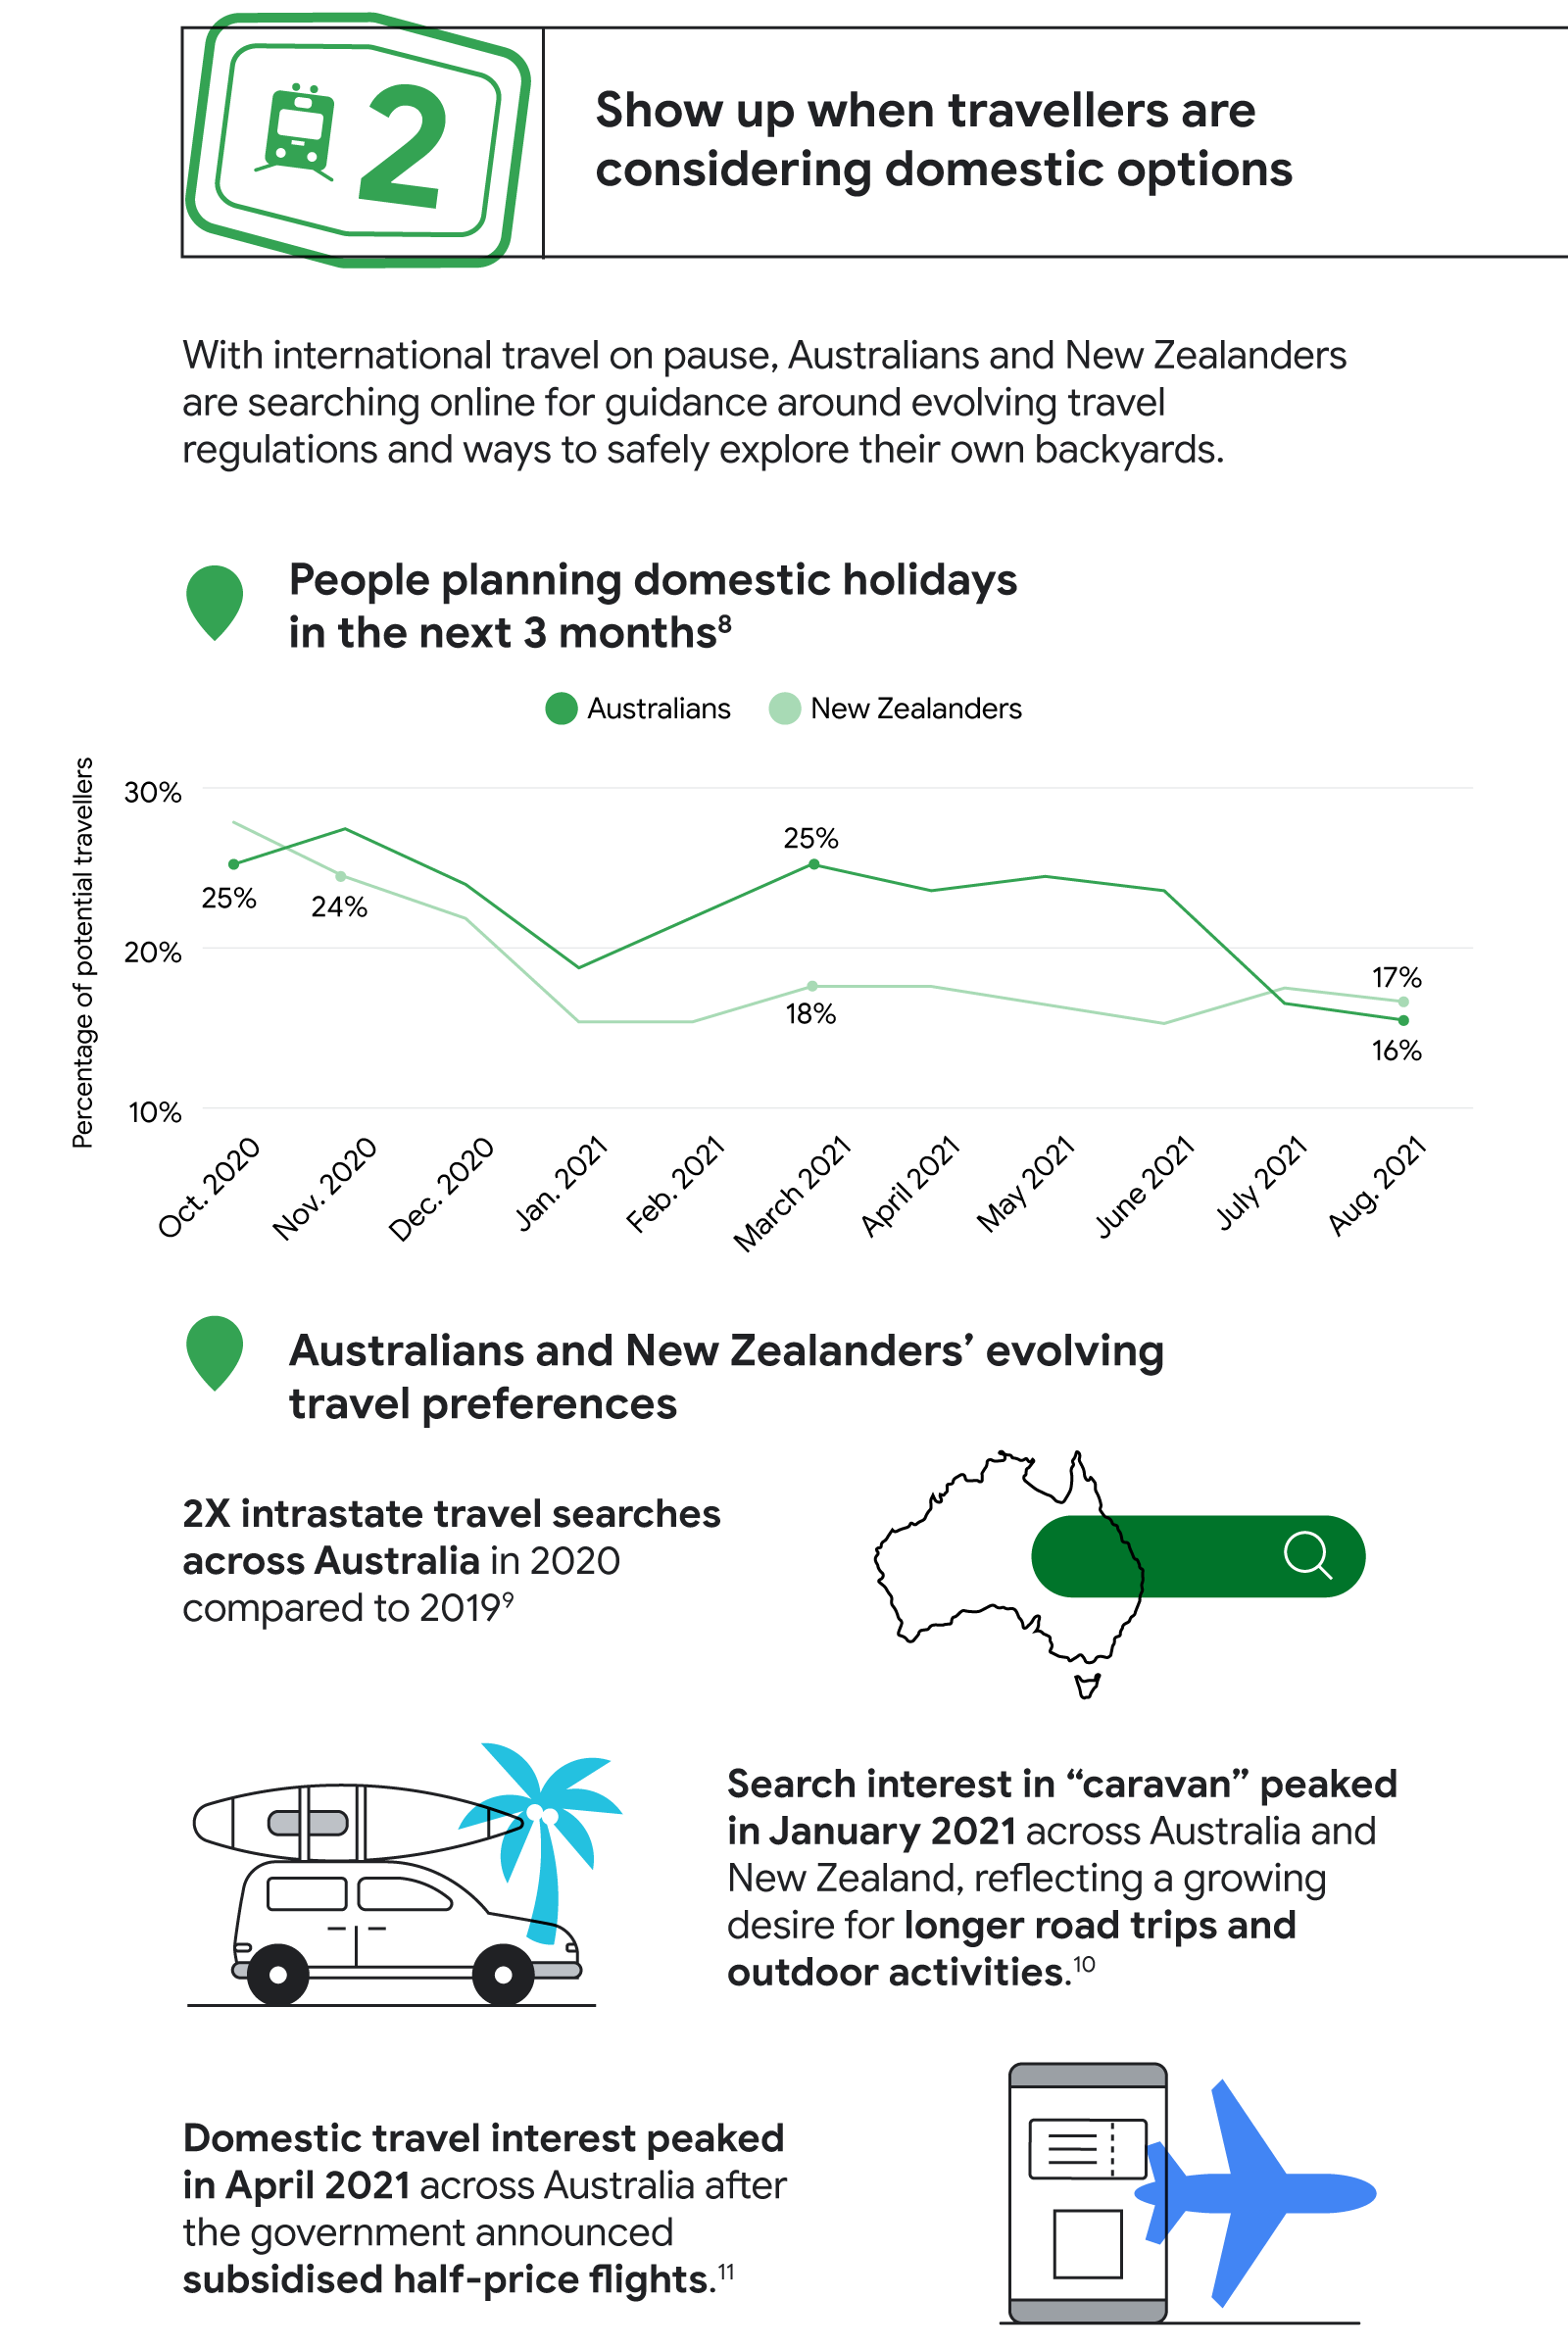 TwG_AUNZ_Travel-Insights_IG-6.png